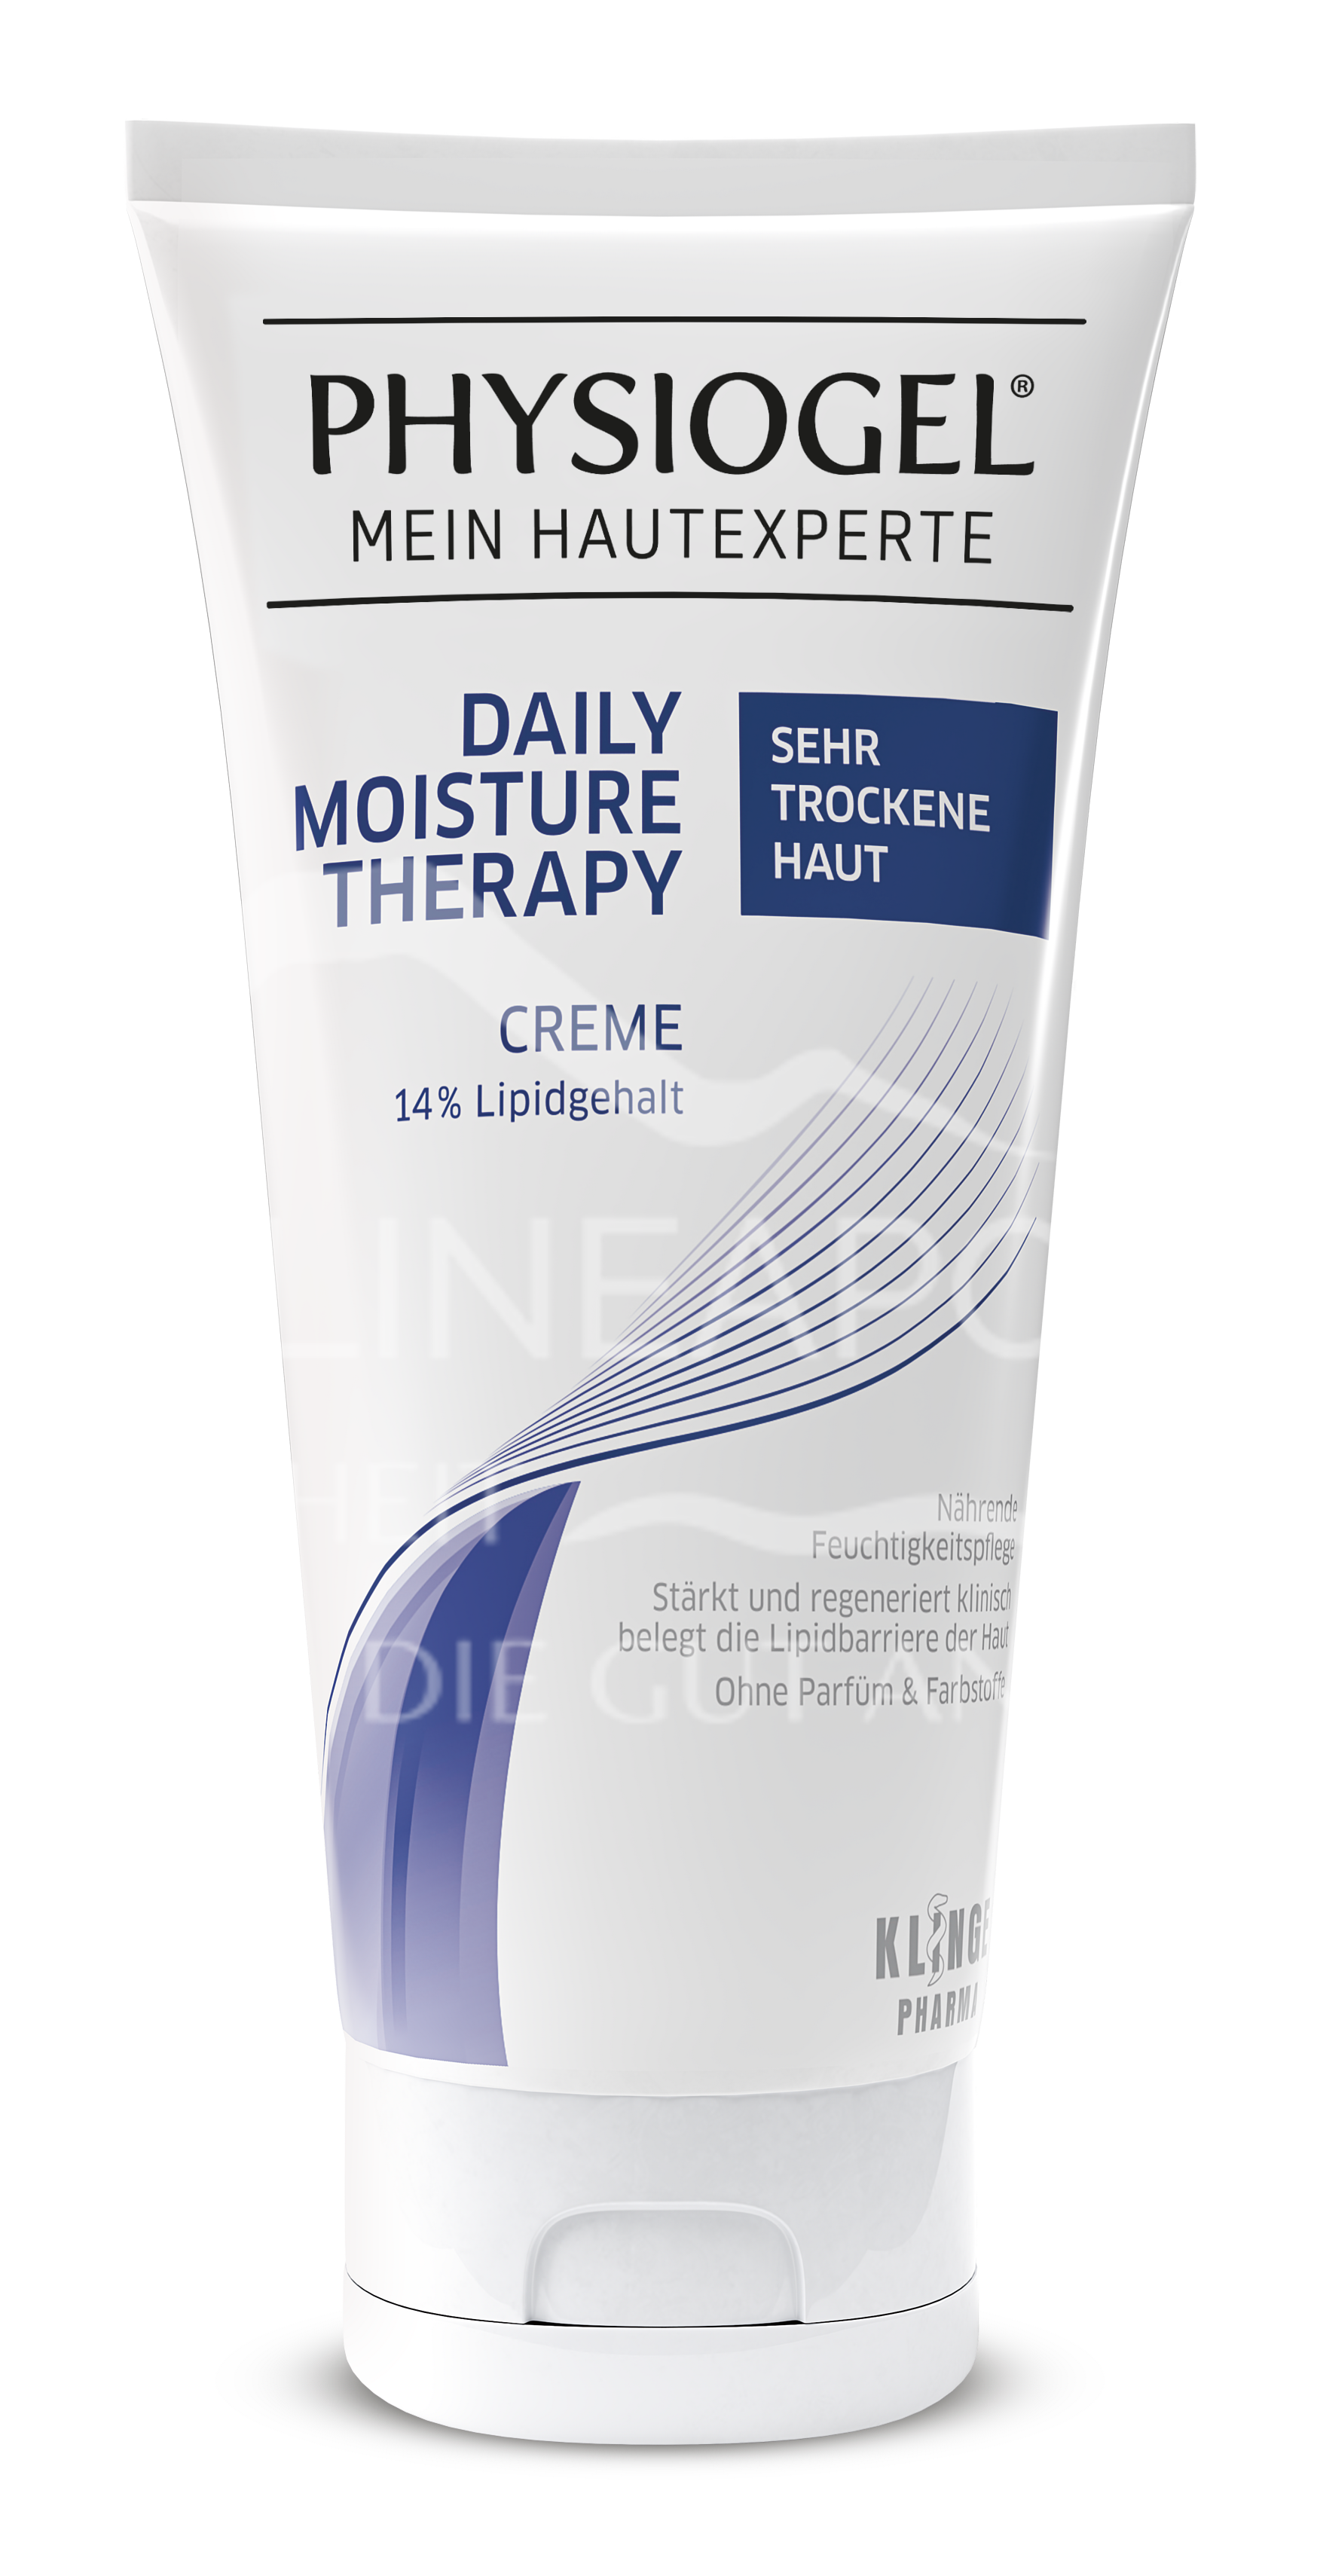 Physiogel® Daily Moisture Therapy Creme - Sehr trockene Haut